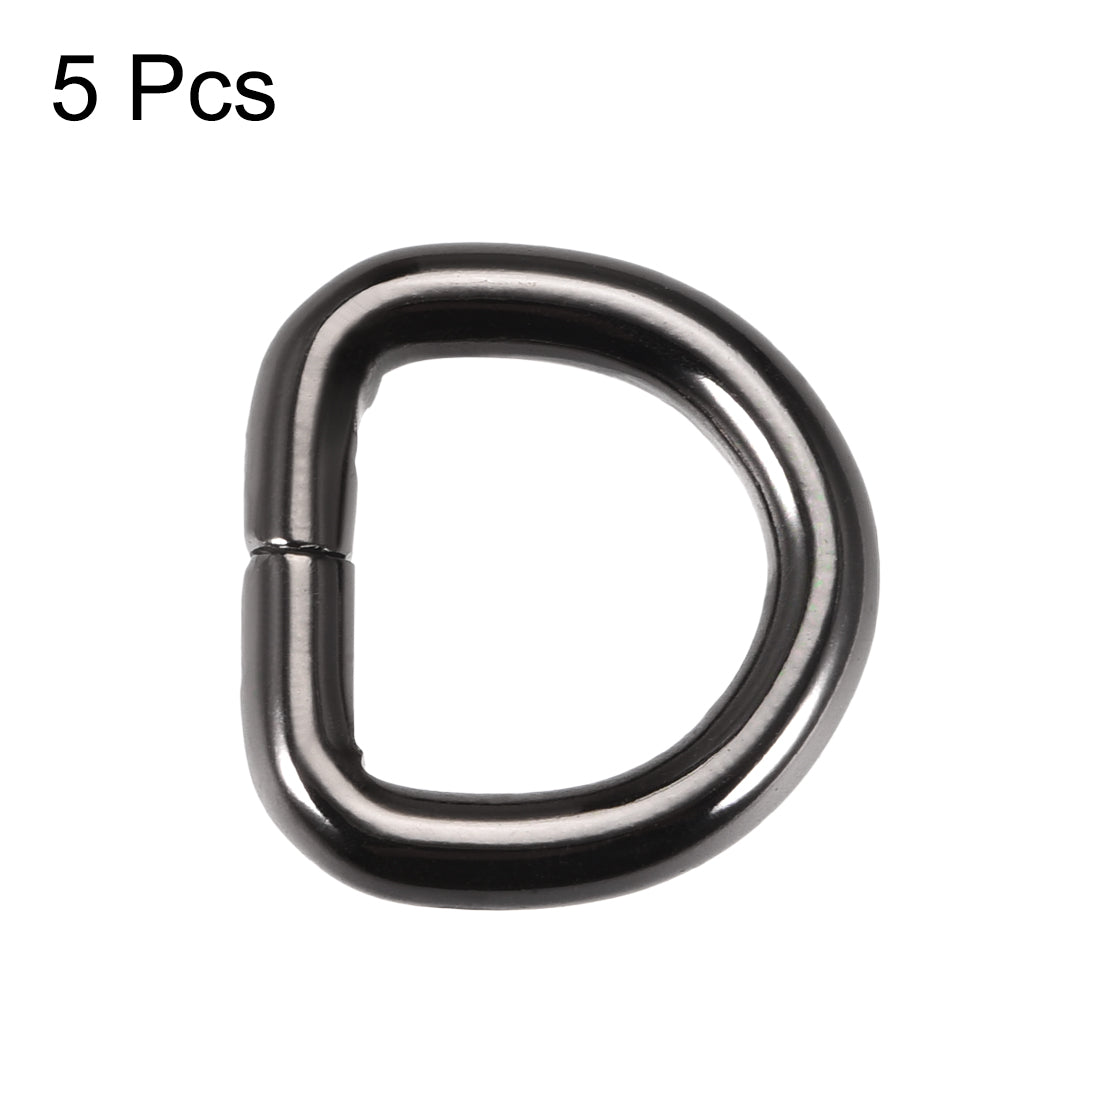 uxcell Uxcell 5 Pcs D Ring Buckle 0.63 Inch Metal Semi-Circular D-Rings Black for Hardware Bags Belts Craft DIY Accessories